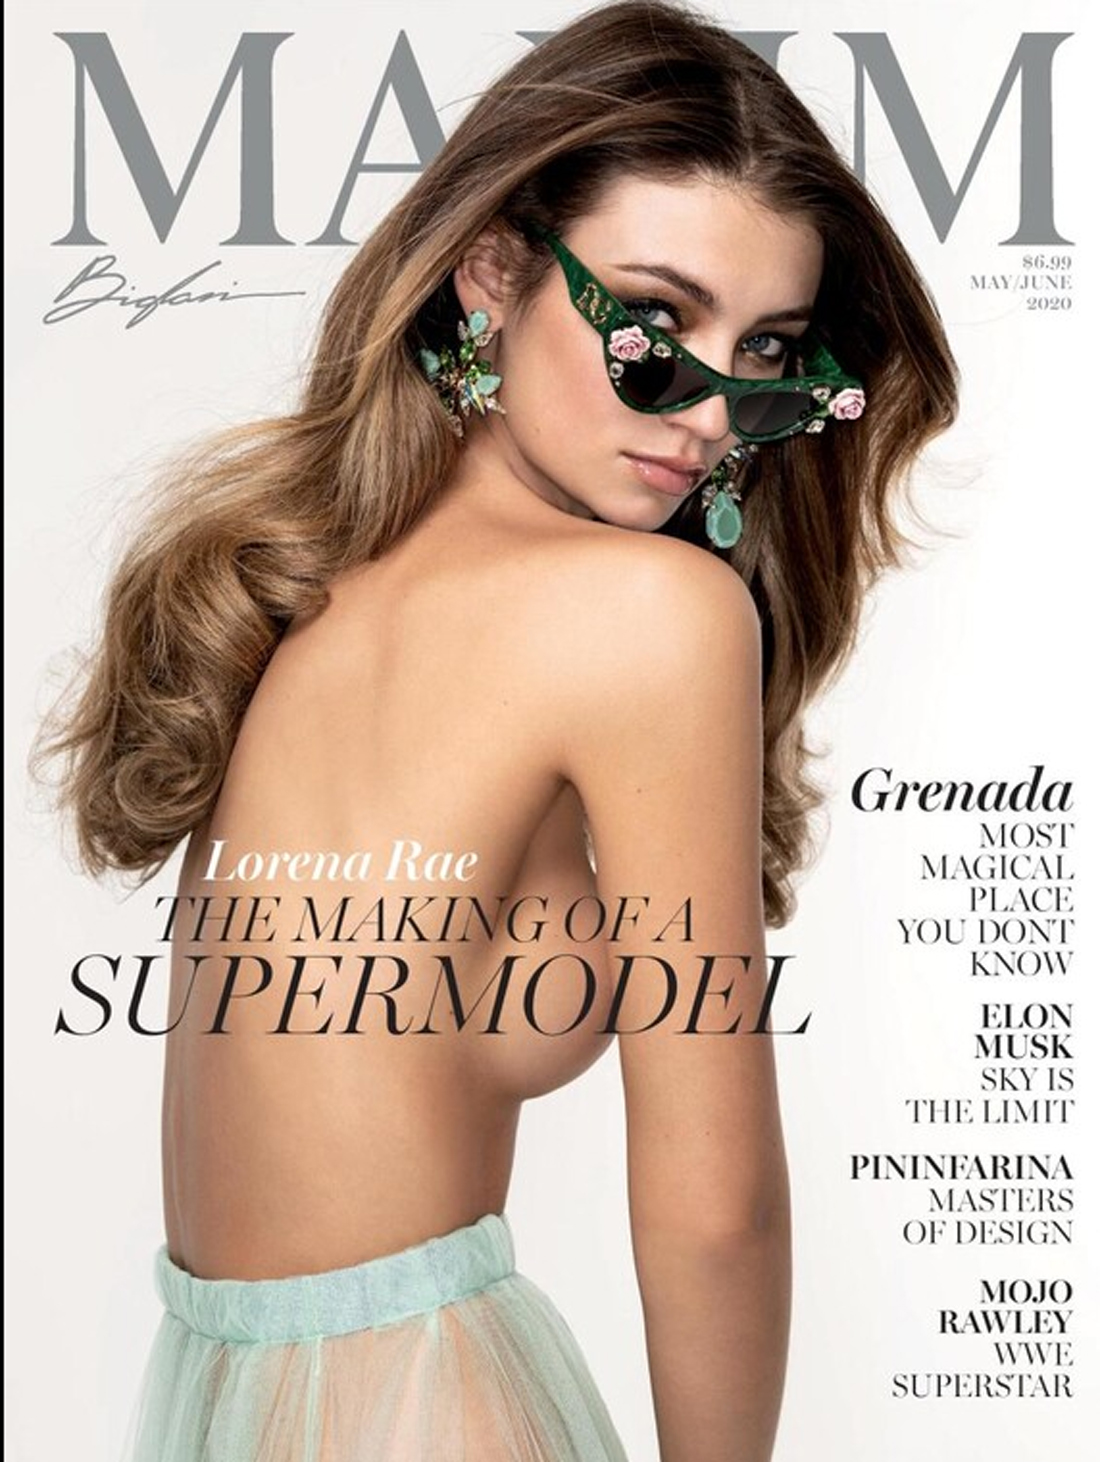 See the sexiest spring girl who photographed MAXIM 4